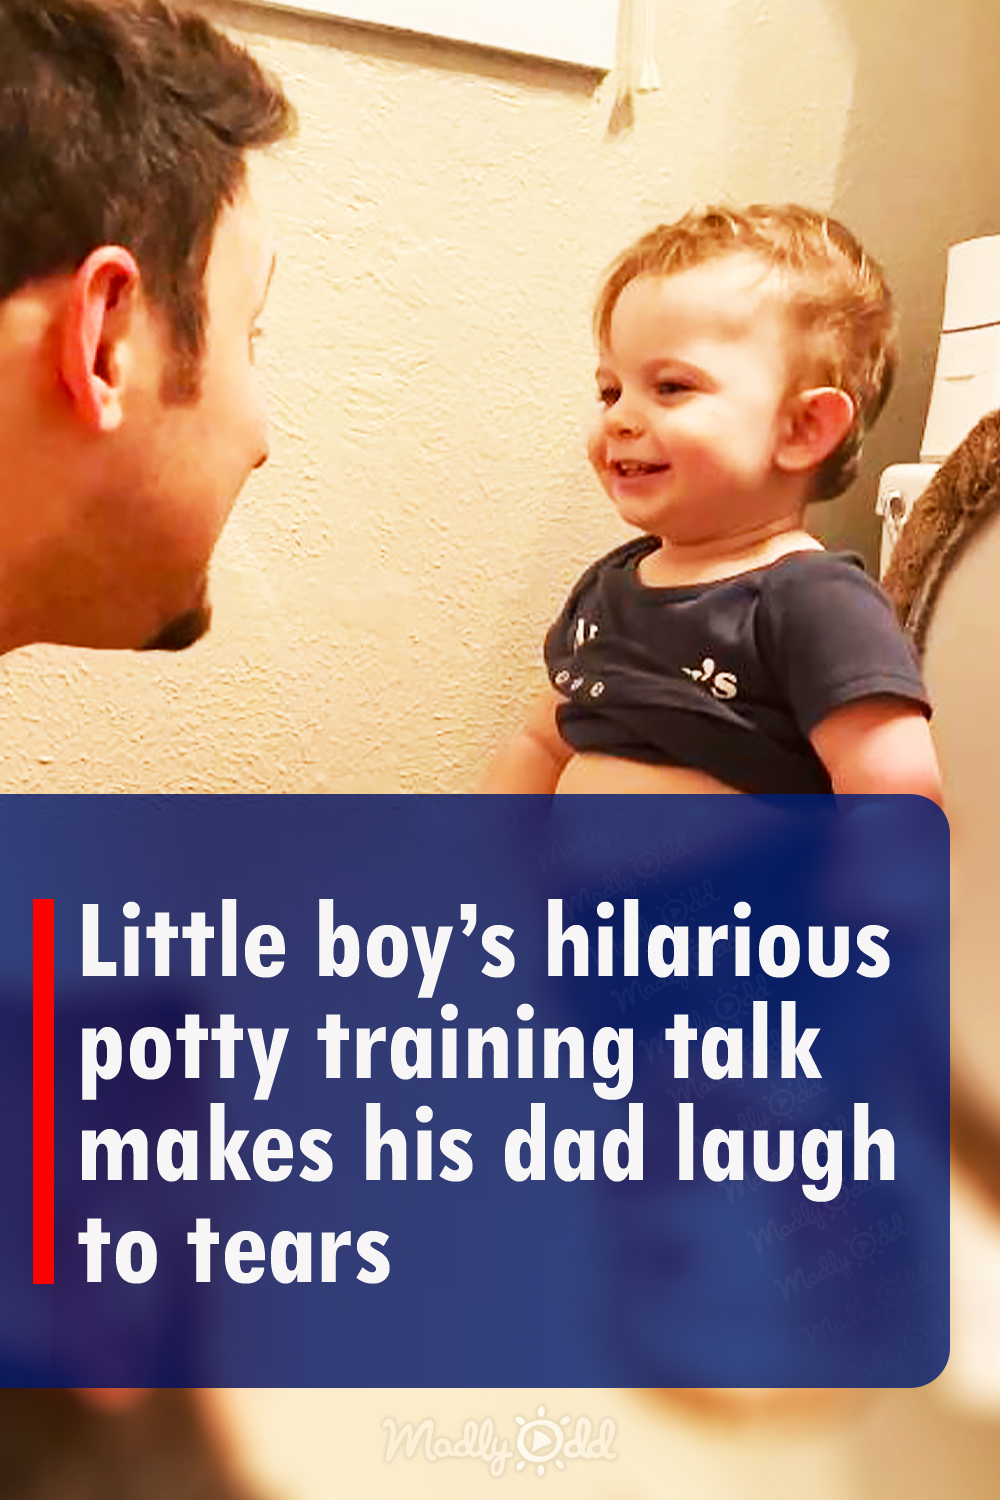 Little boy’s hilarious potty training talk makes his dad laugh to tears